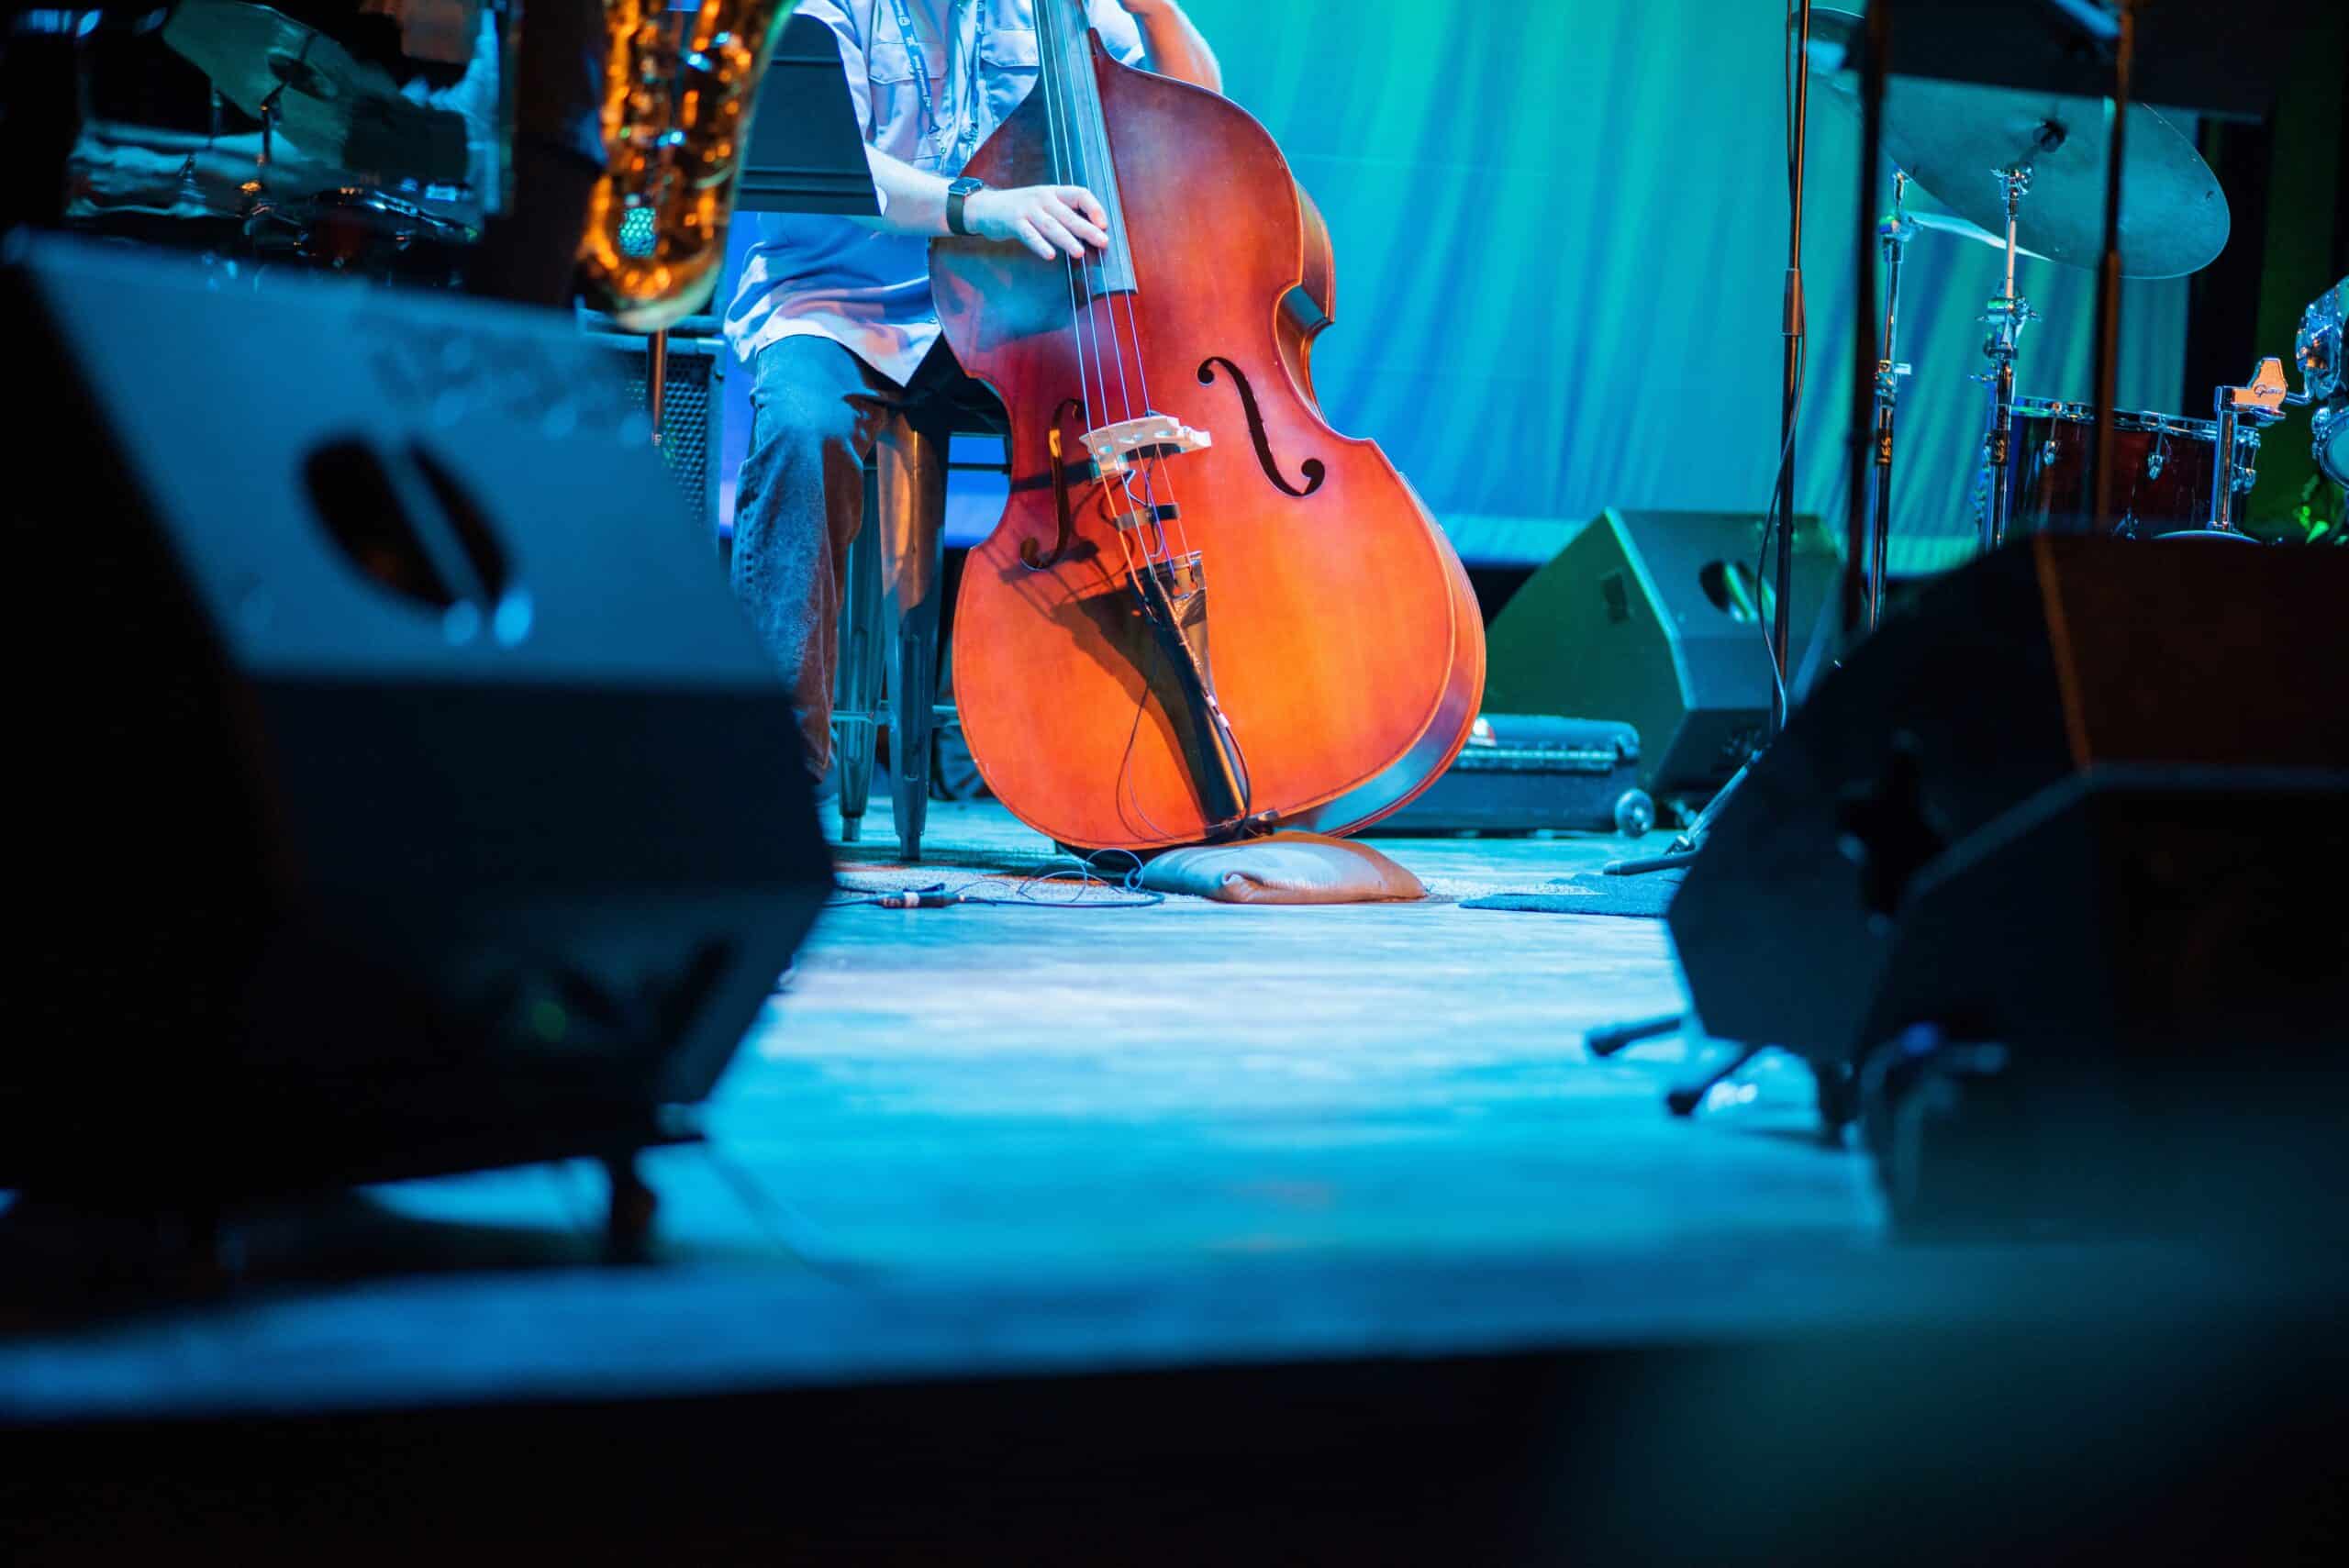 Double bassist performing on stage seen from crowd